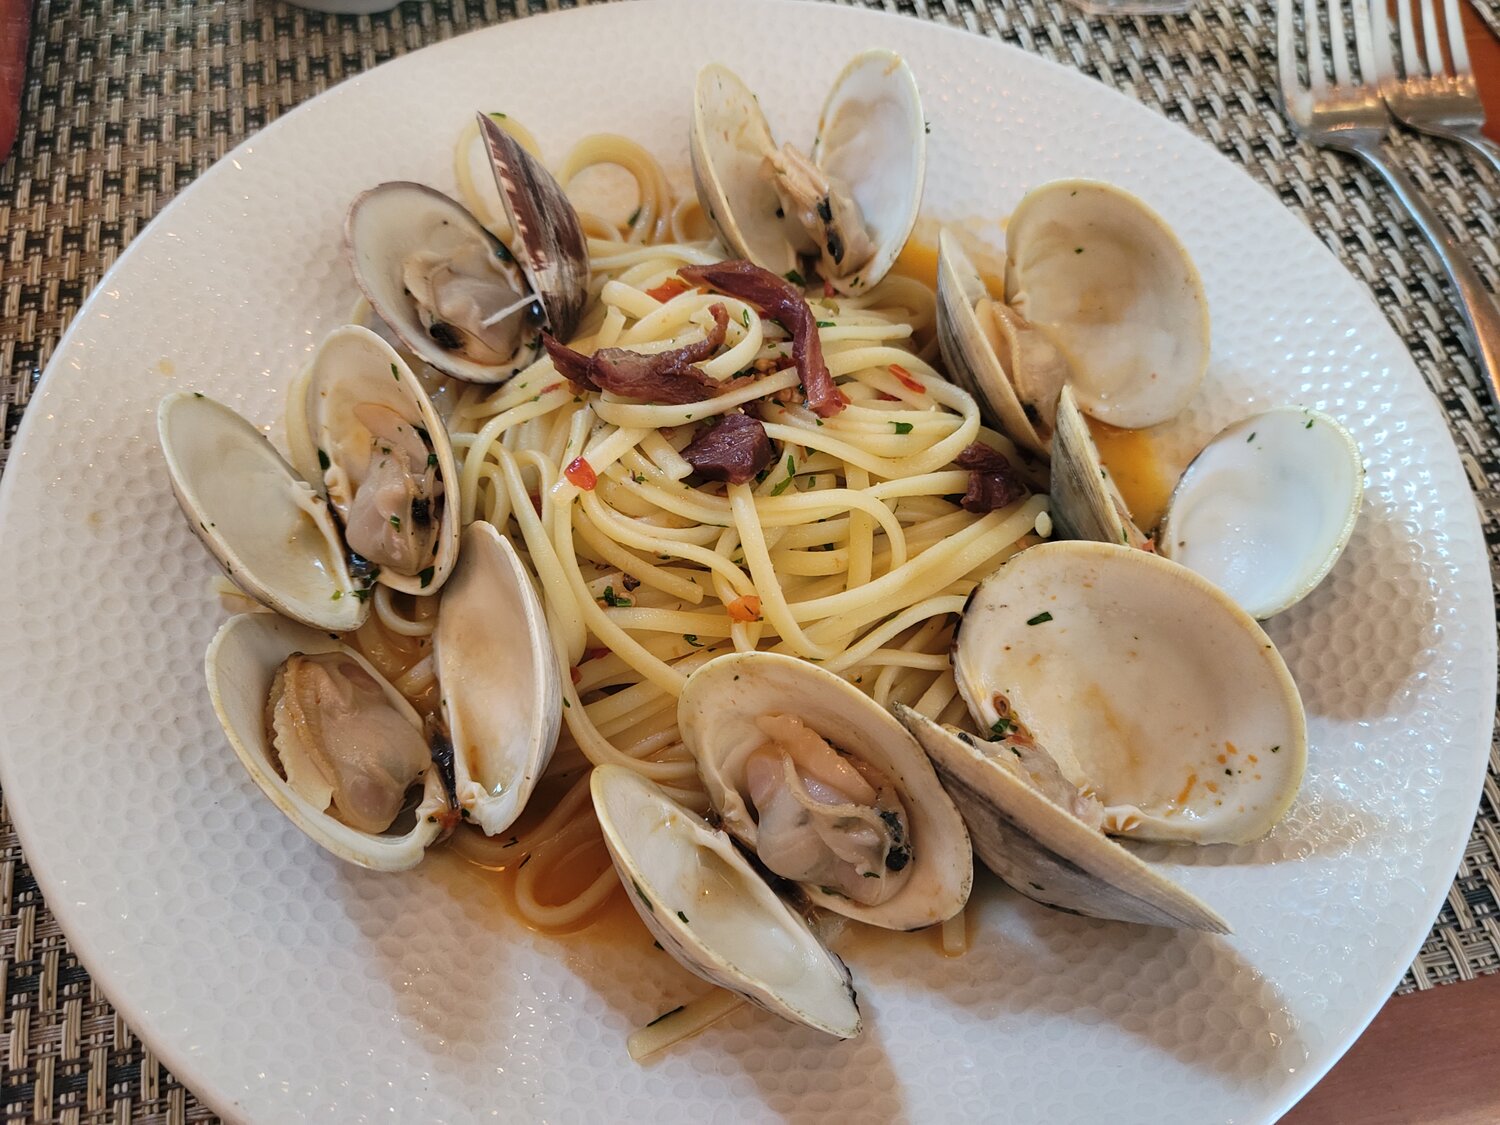 The Linguine with Clams overflows with succulent littlenecks in a wine sauce.